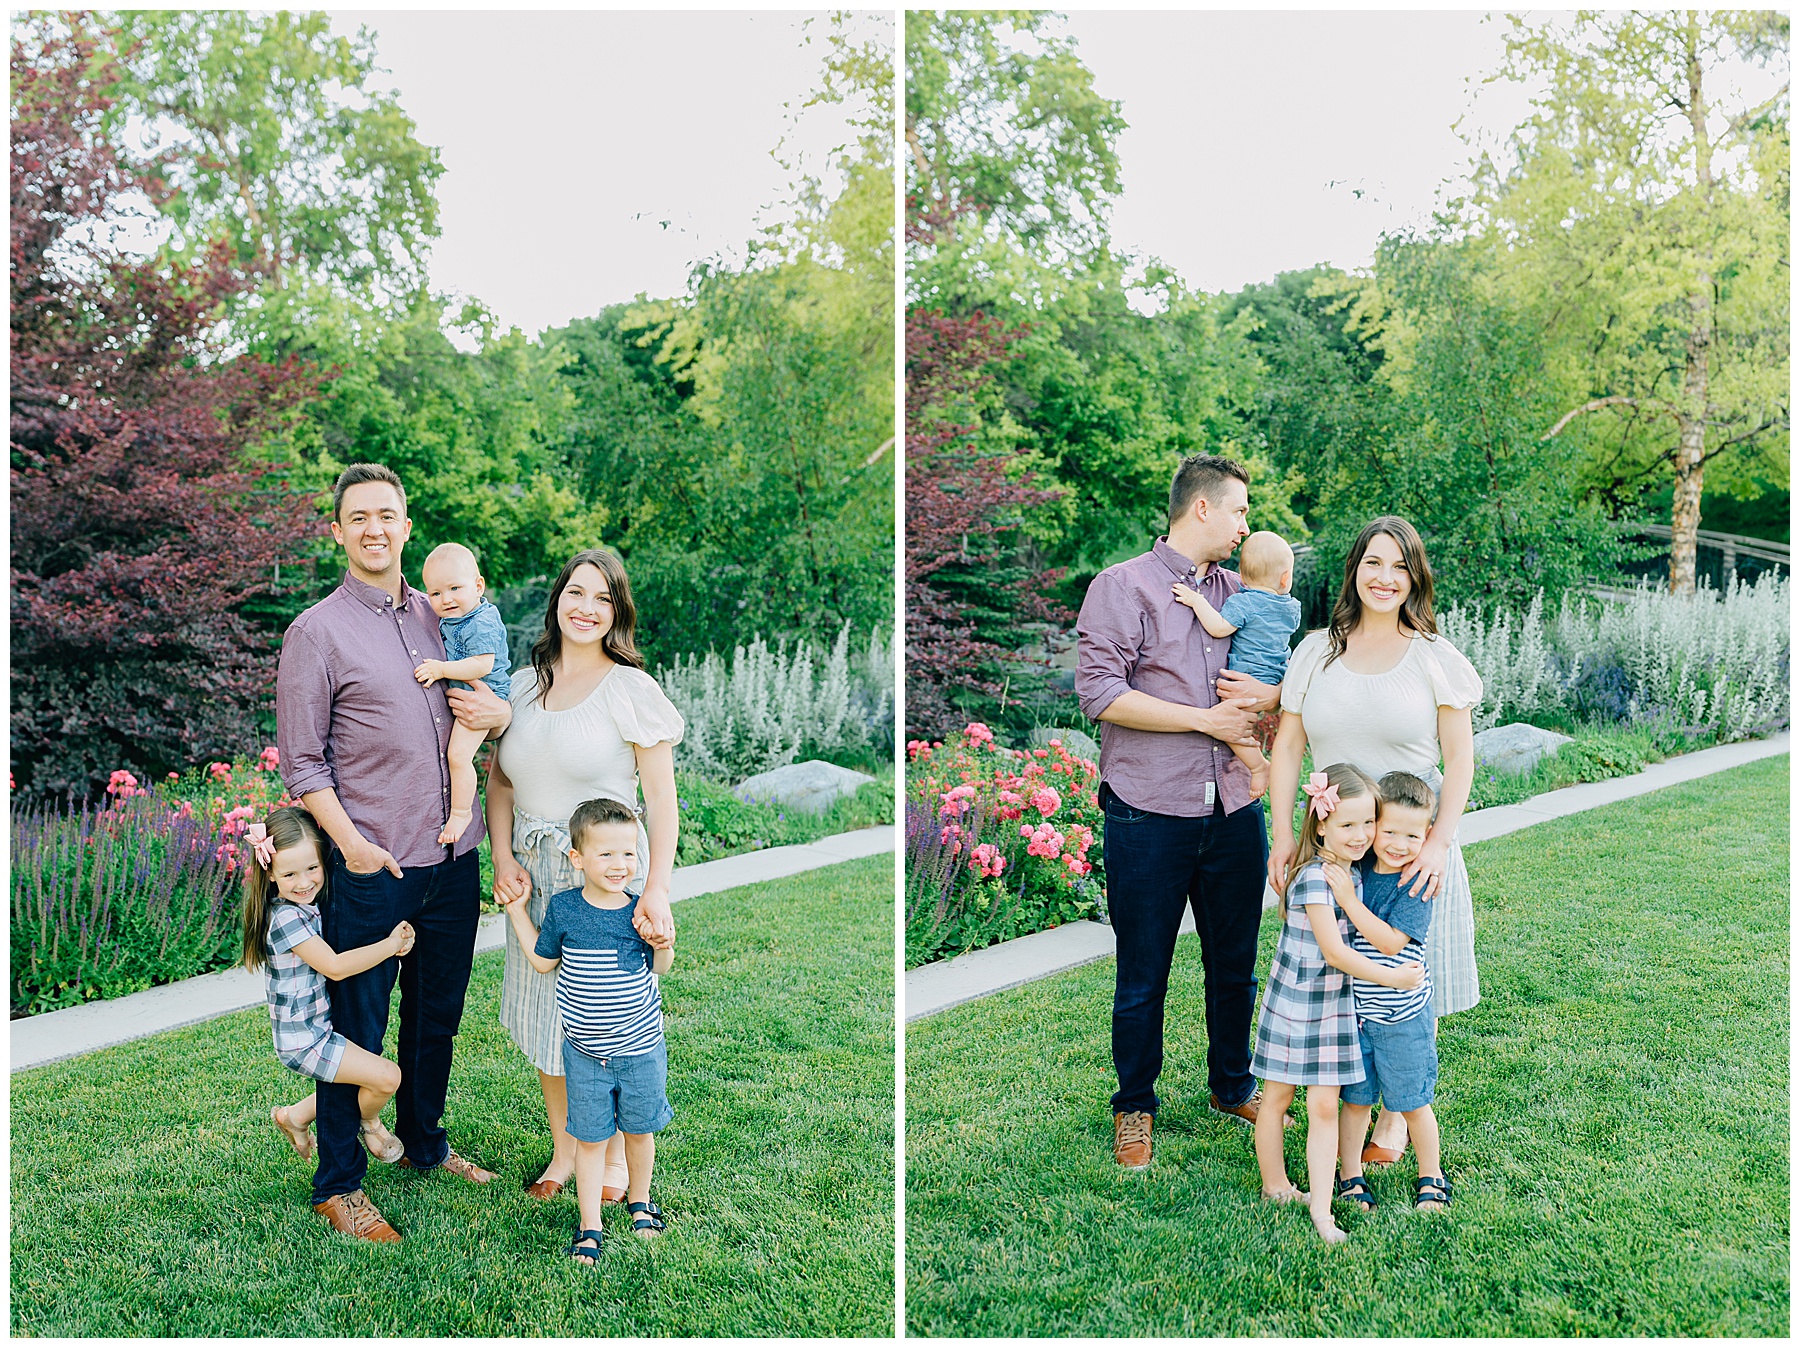 Rogers | Extended Family Pictures | Qualtrics Gardens